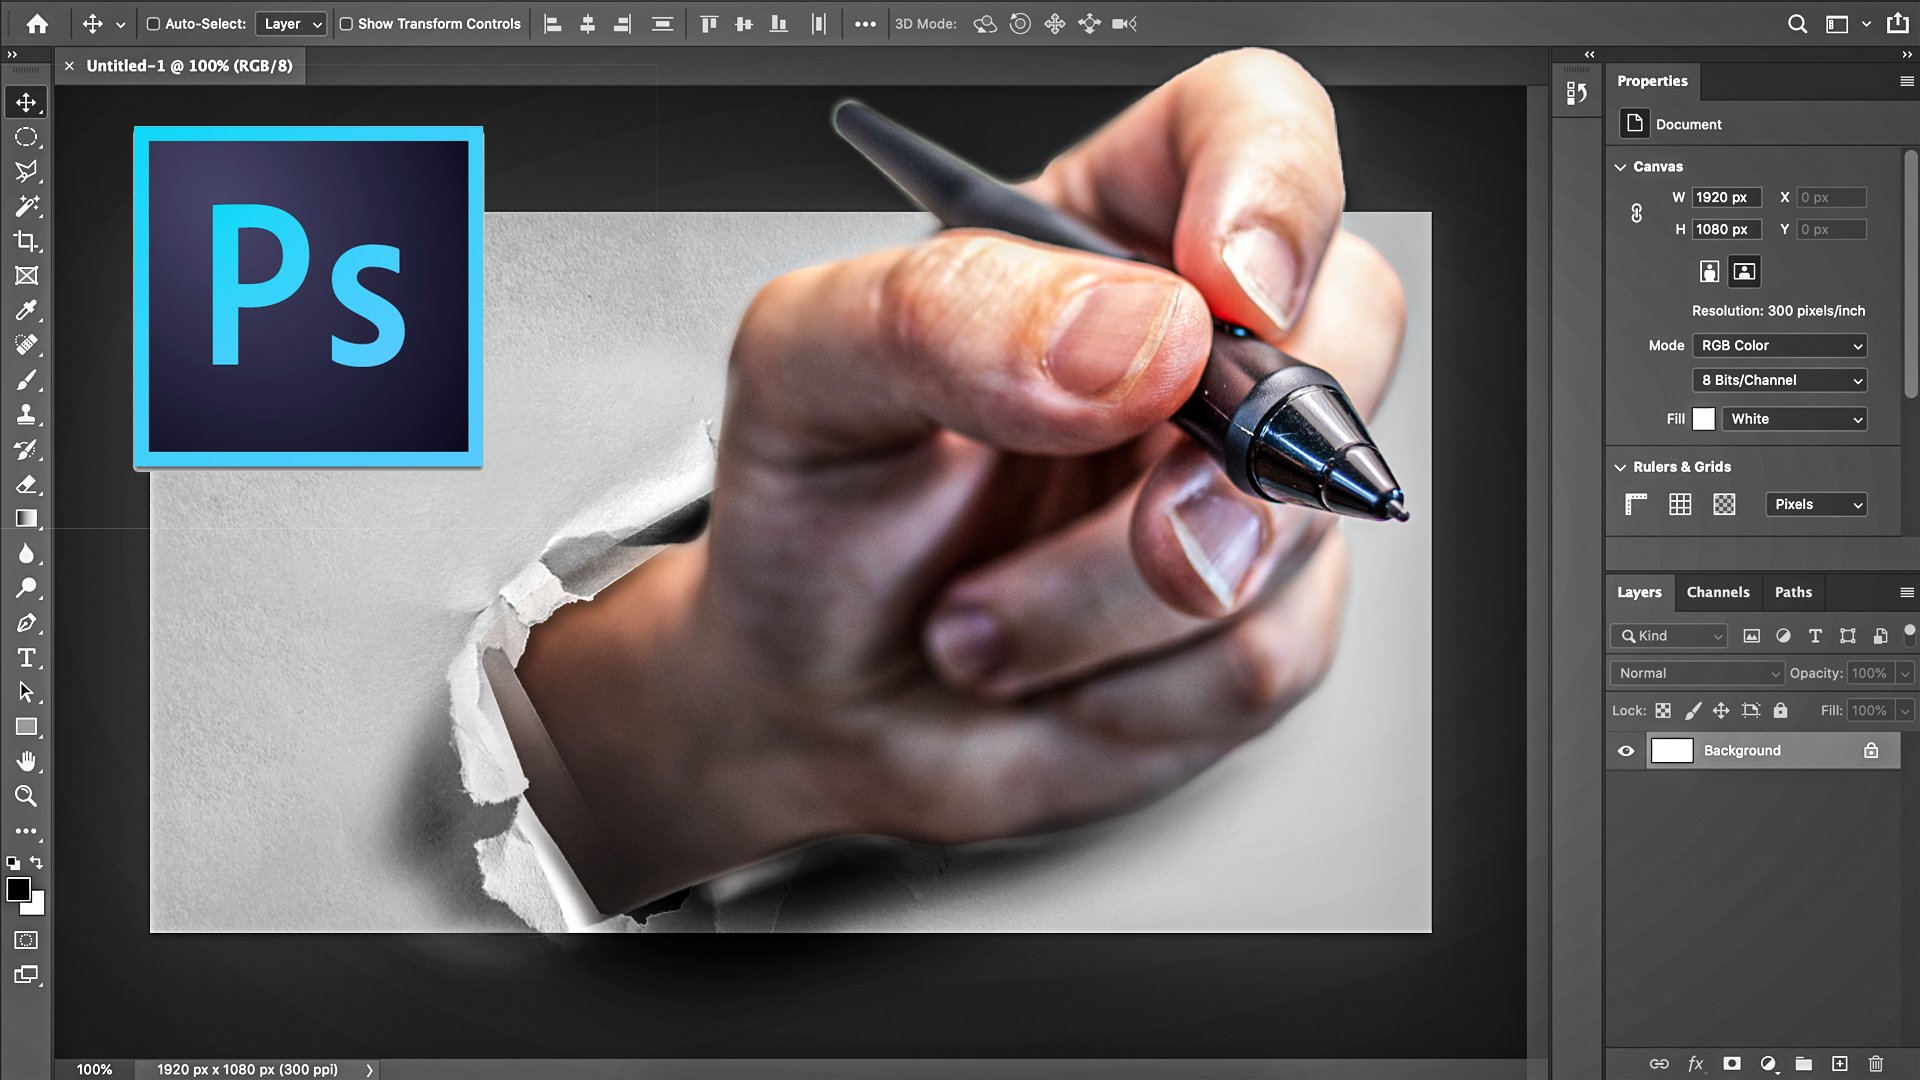 adobe photoshop touch pen tool